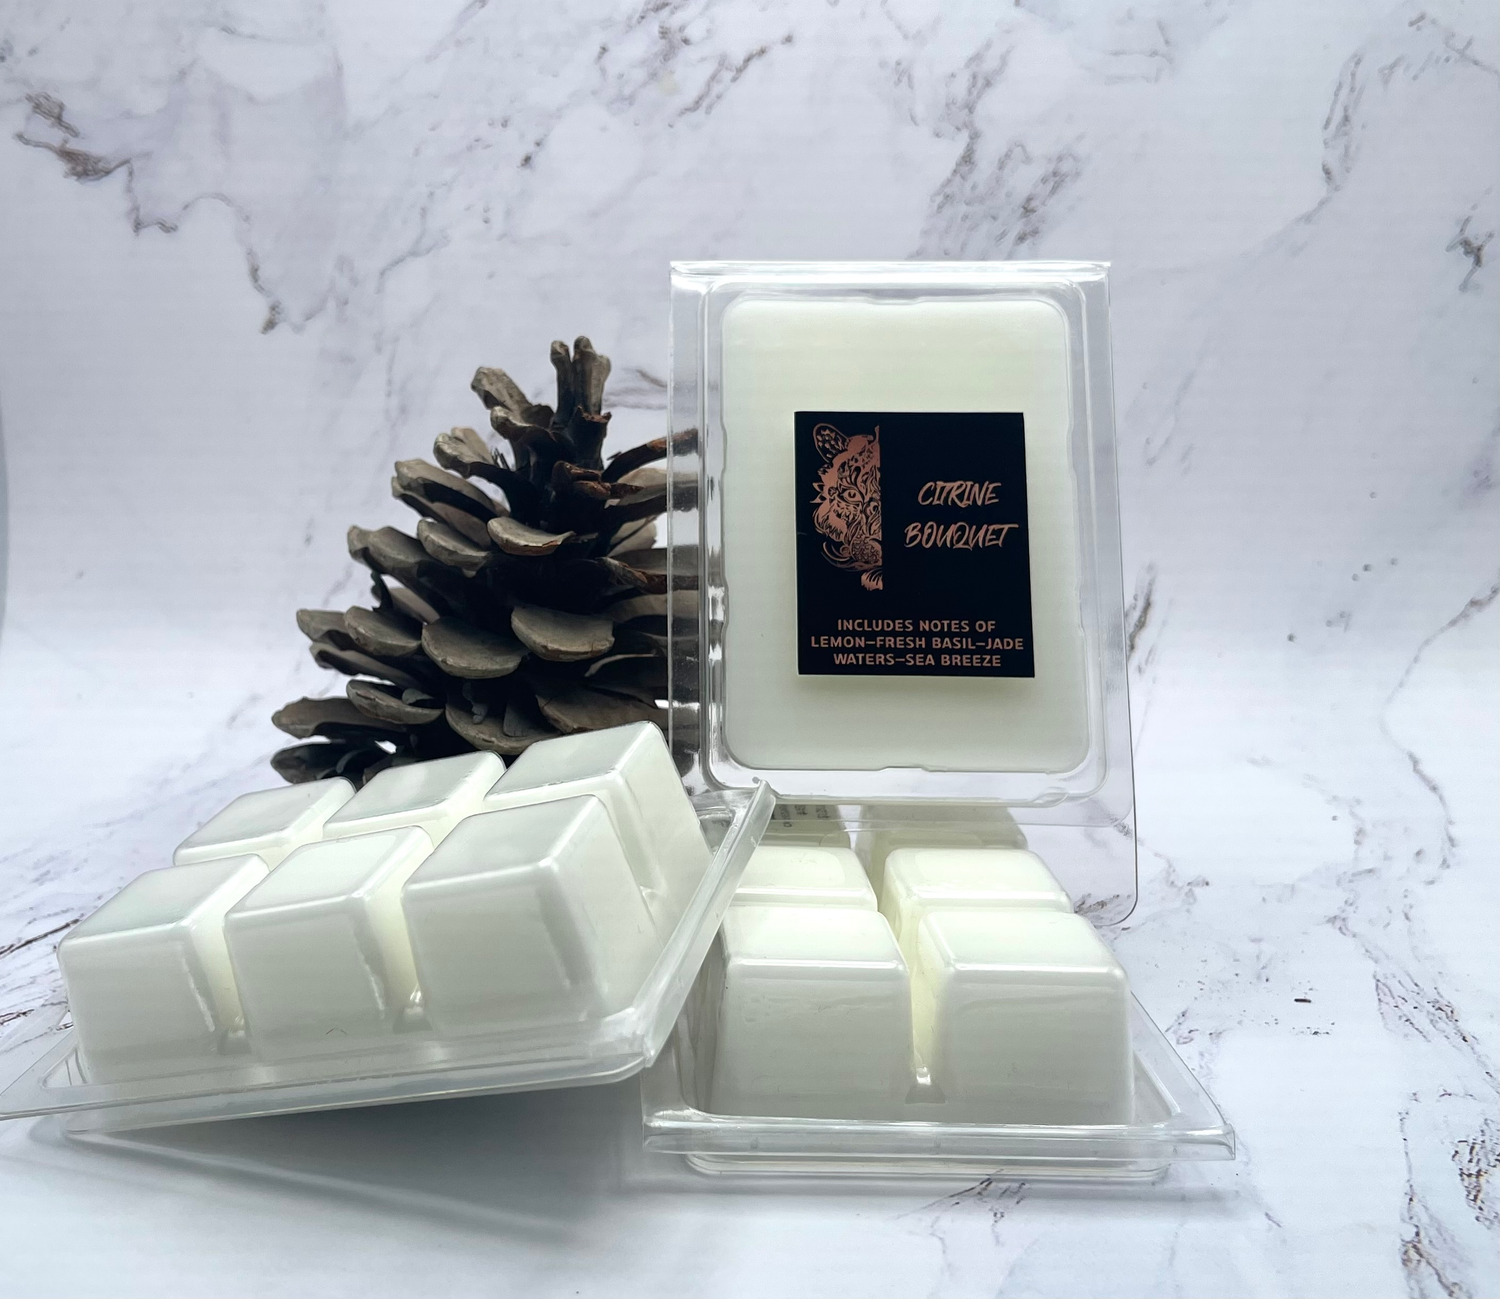 A flame-less option to add fragrances to your space. You can enjoy our variety of wax melts when placed in a wax burner to have the scents permeate your space.